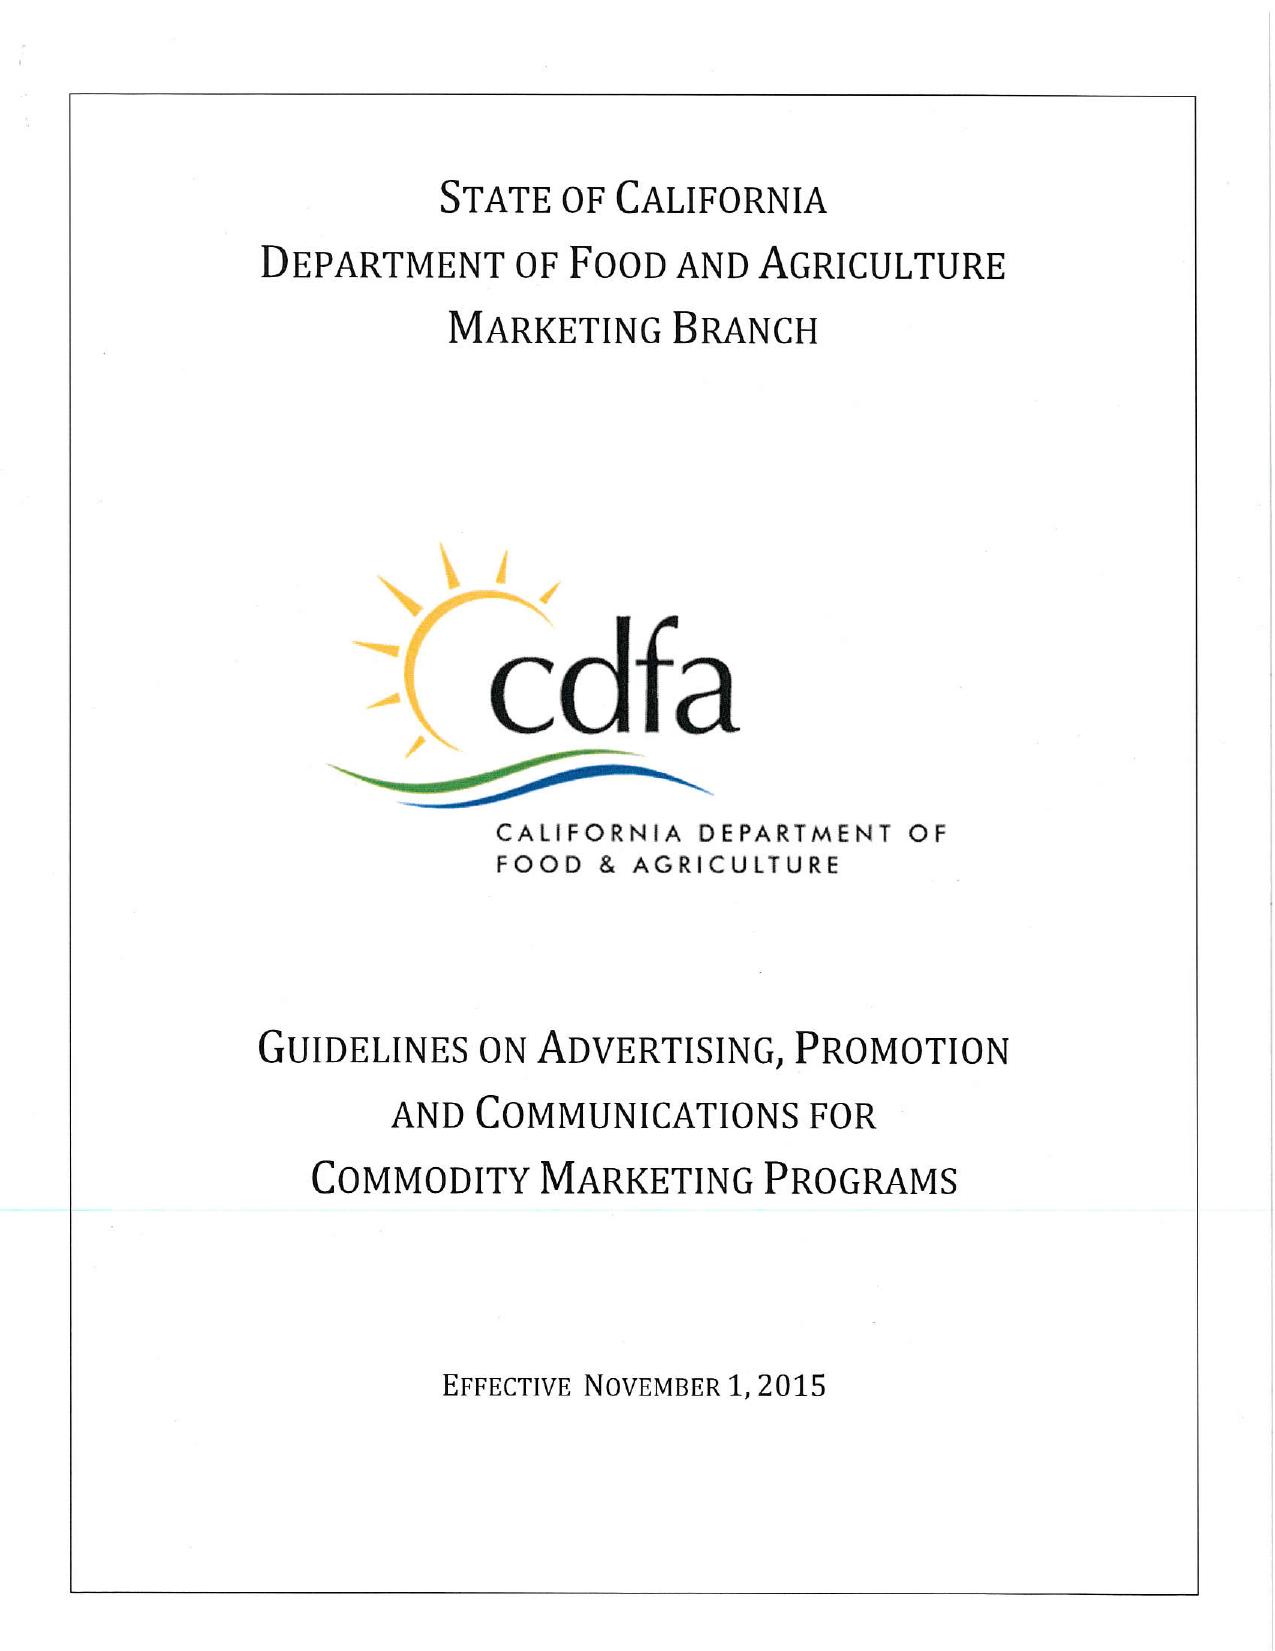 Guidelines on Advertising, promotion and Communications for Commodity Marketing Programs